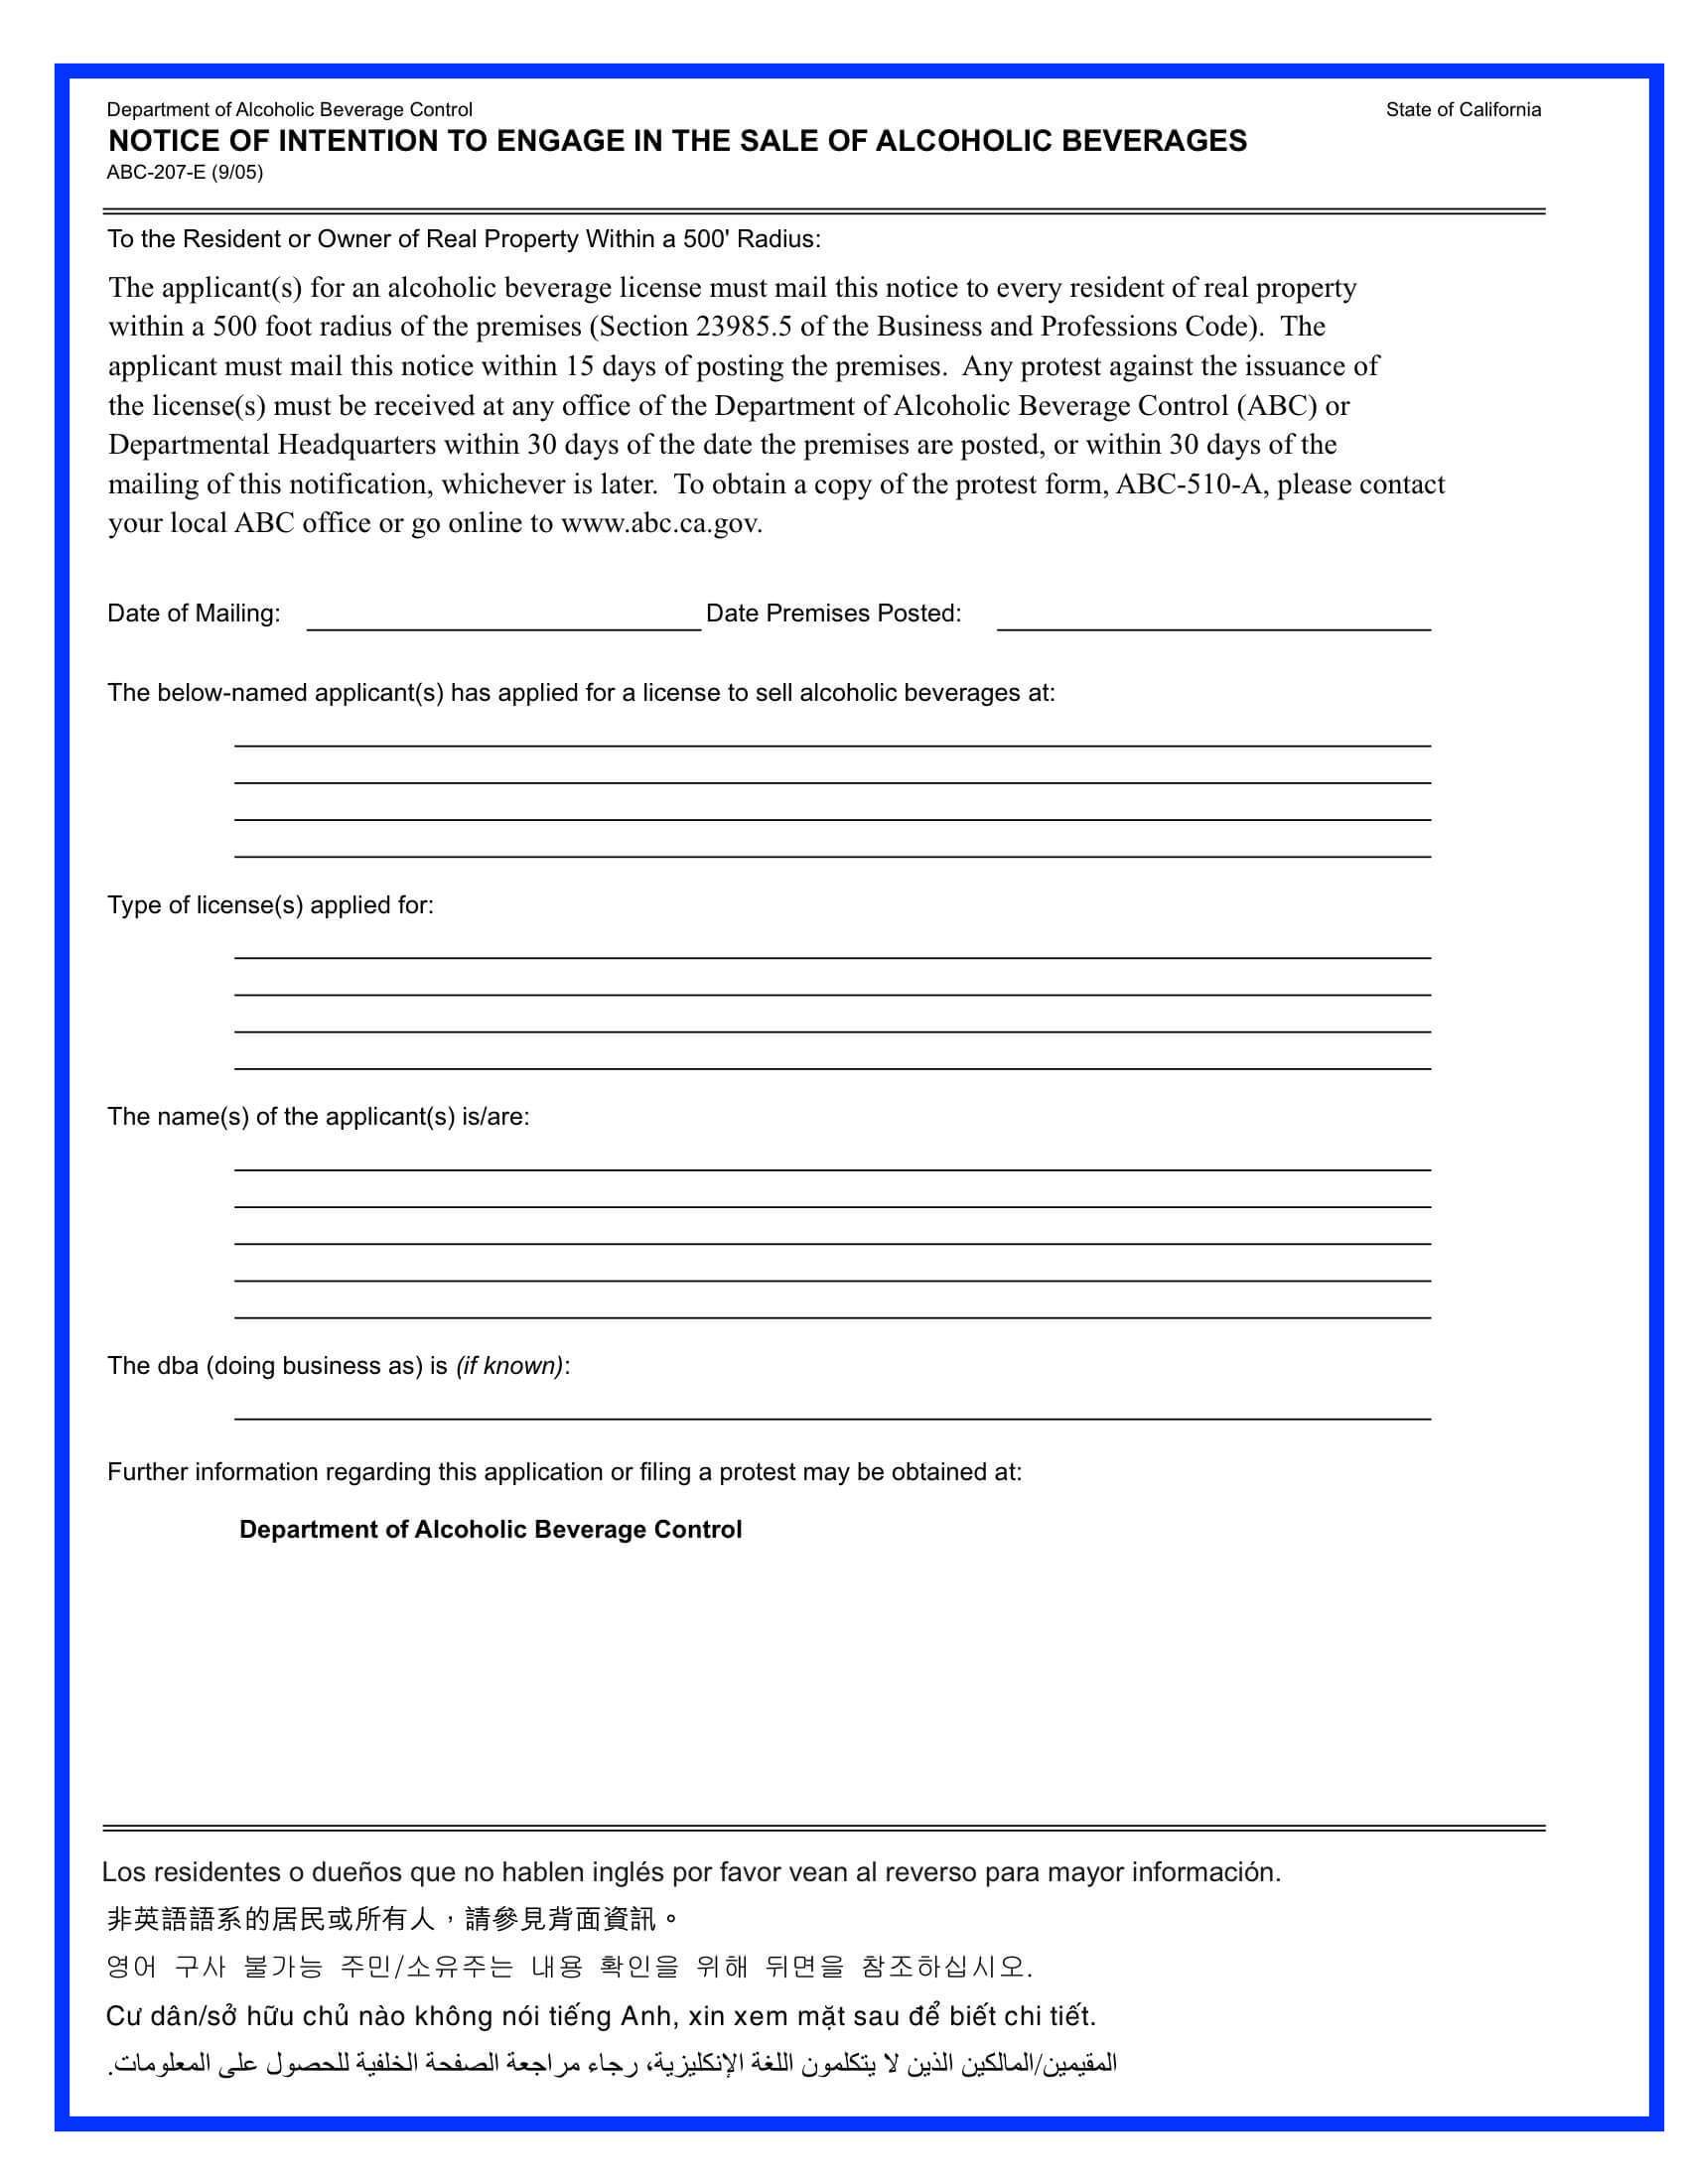 ABC 207E & ABC 207F Department of Alcoholic Beverage Control Mailing to 500' Residents